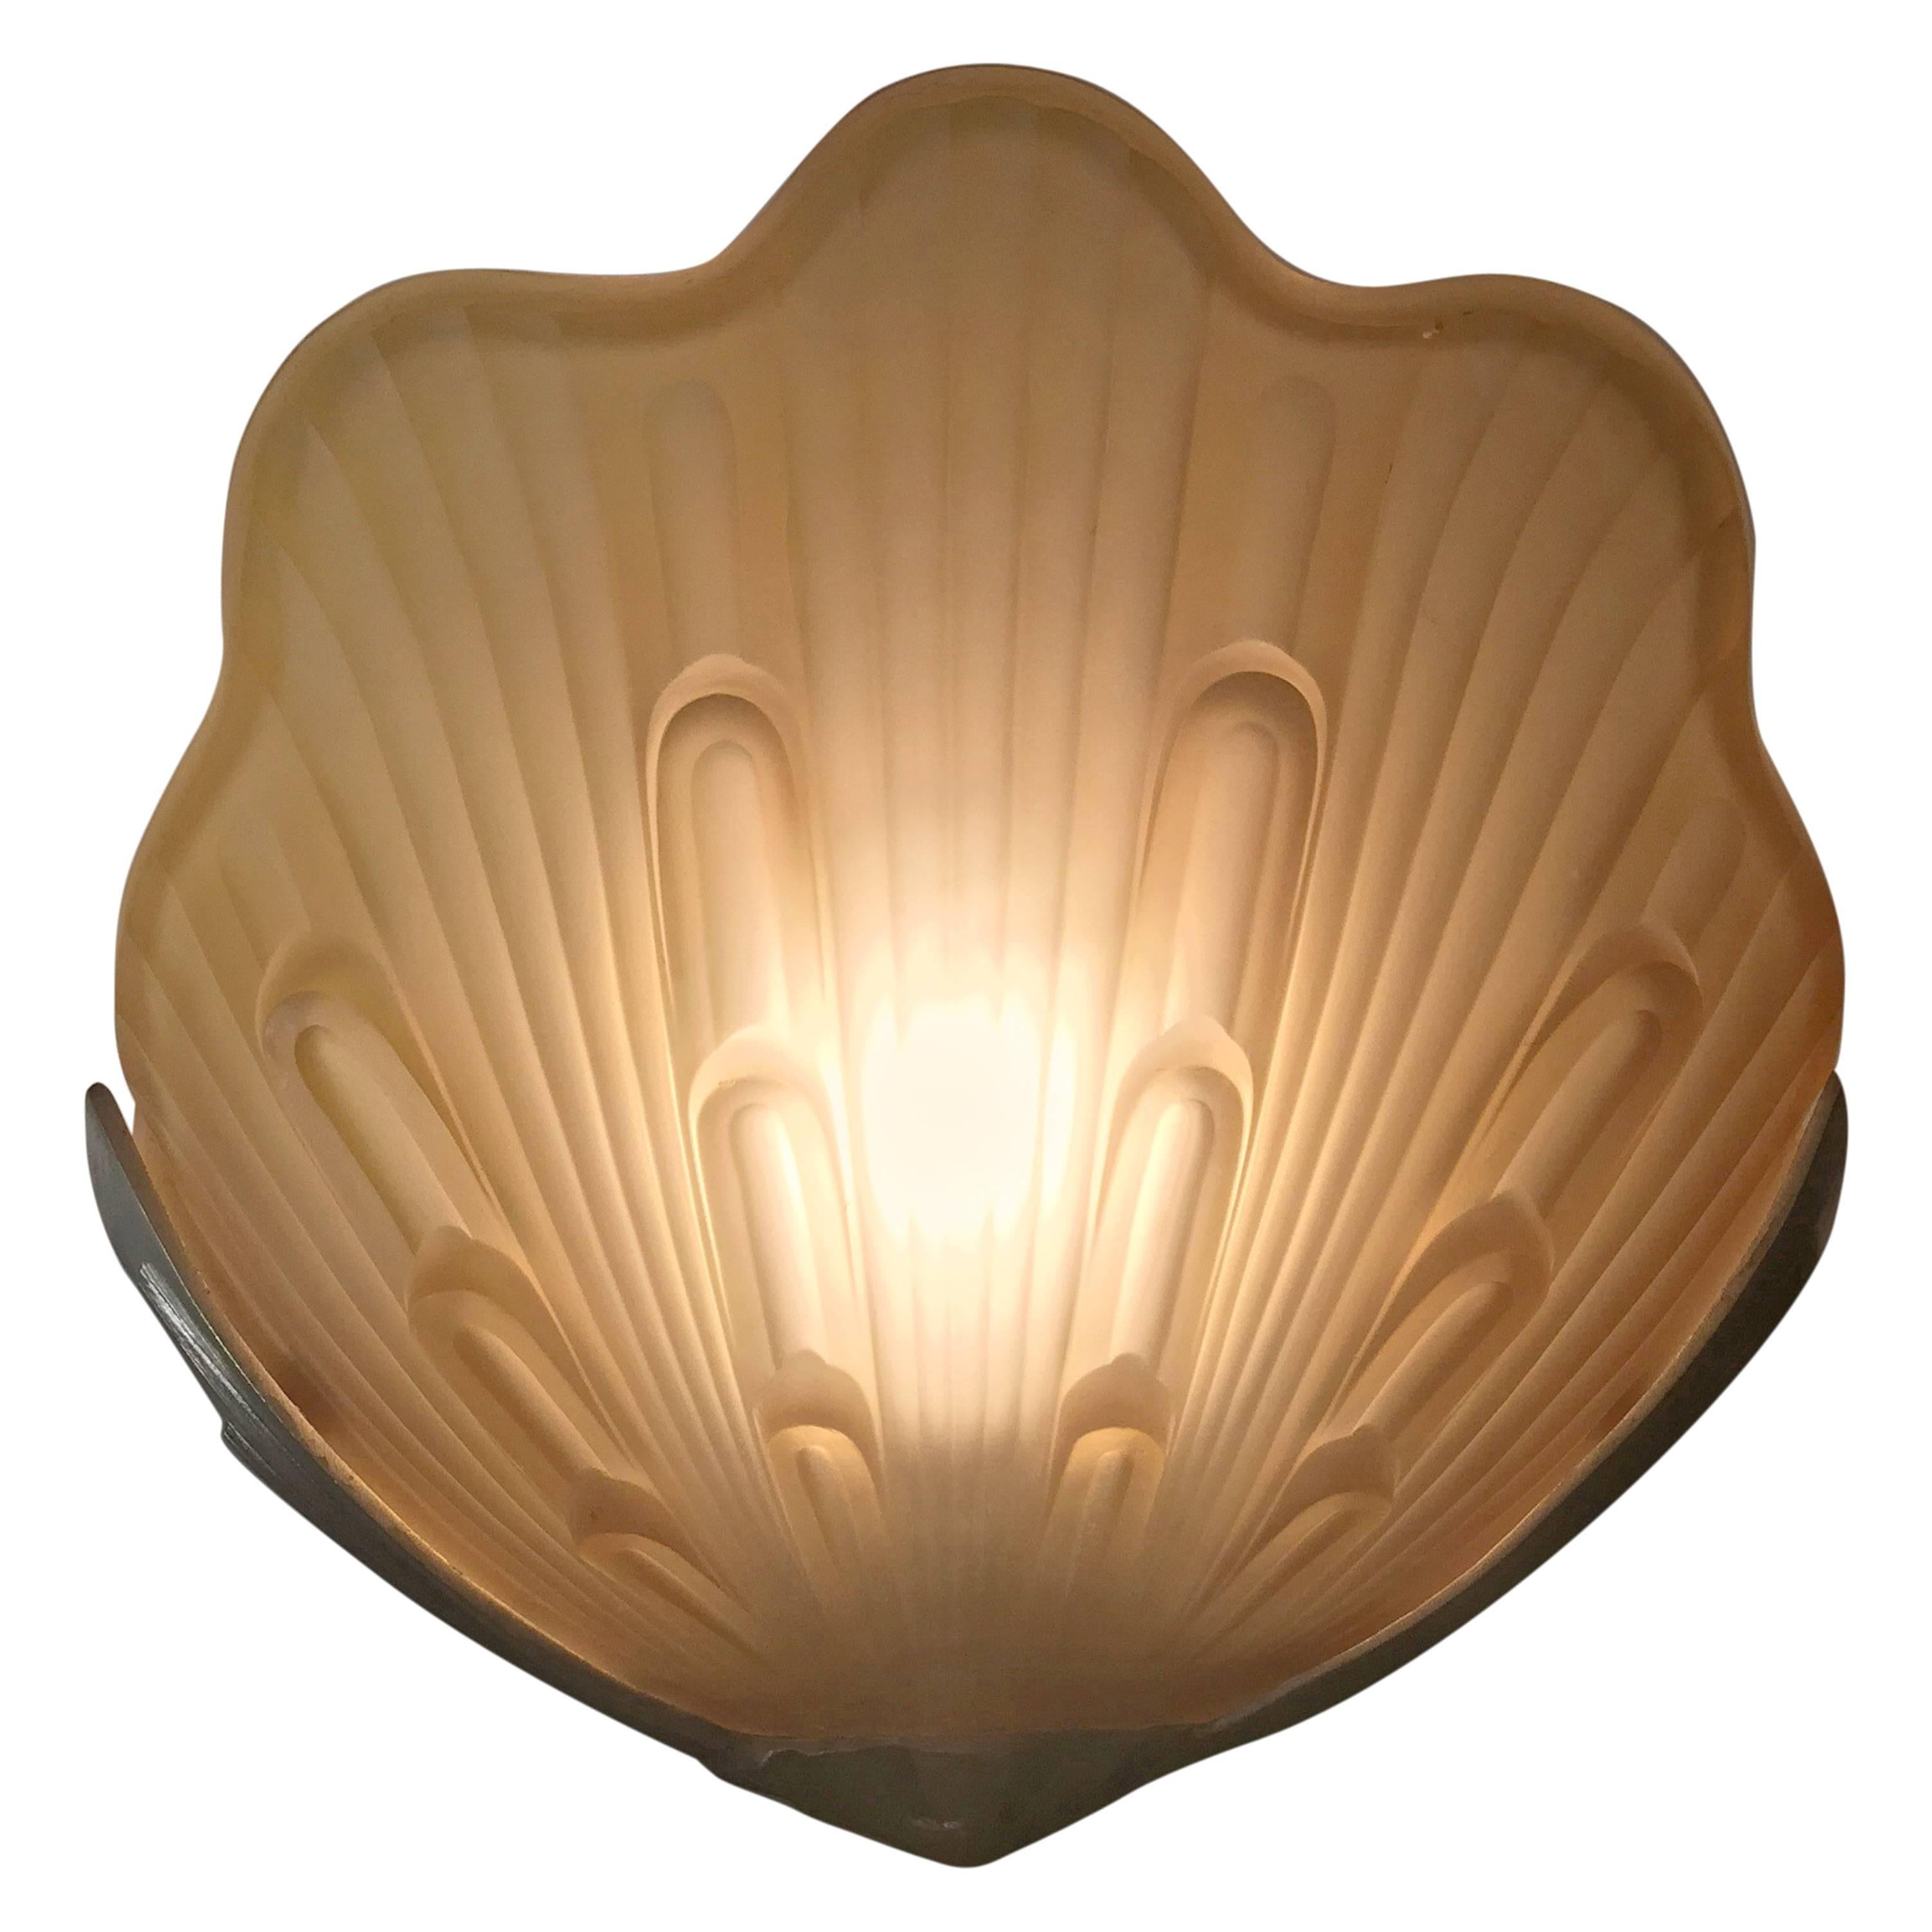 Pair of Wonderful Vintage Shell Wall Sconce For Sale